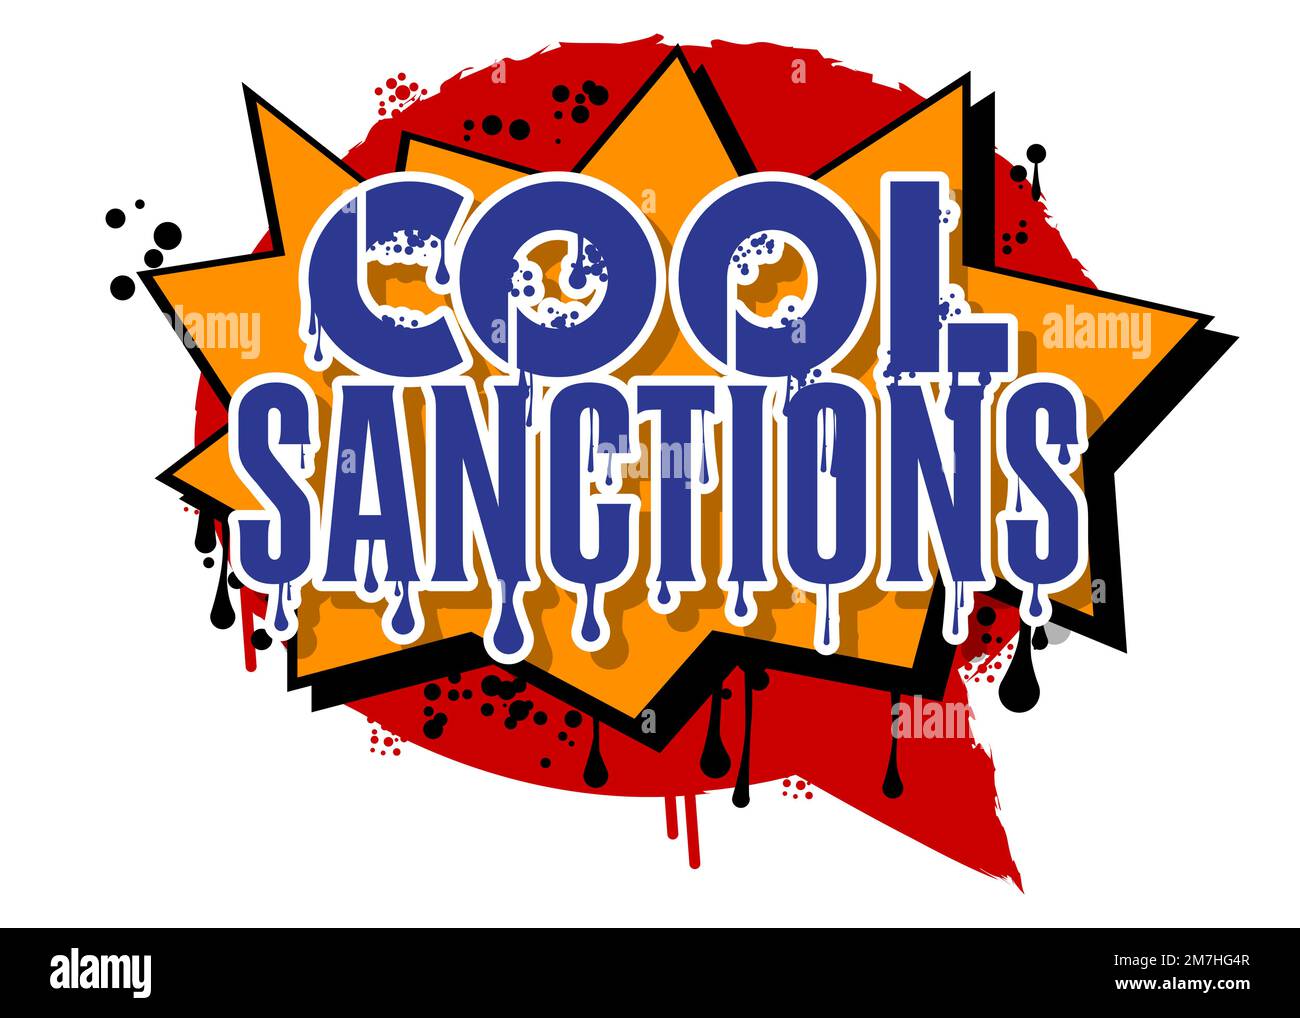 Cool Sanctions. Graffiti tag. Abstract modern street art decoration performed in urban painting style. Stock Vector